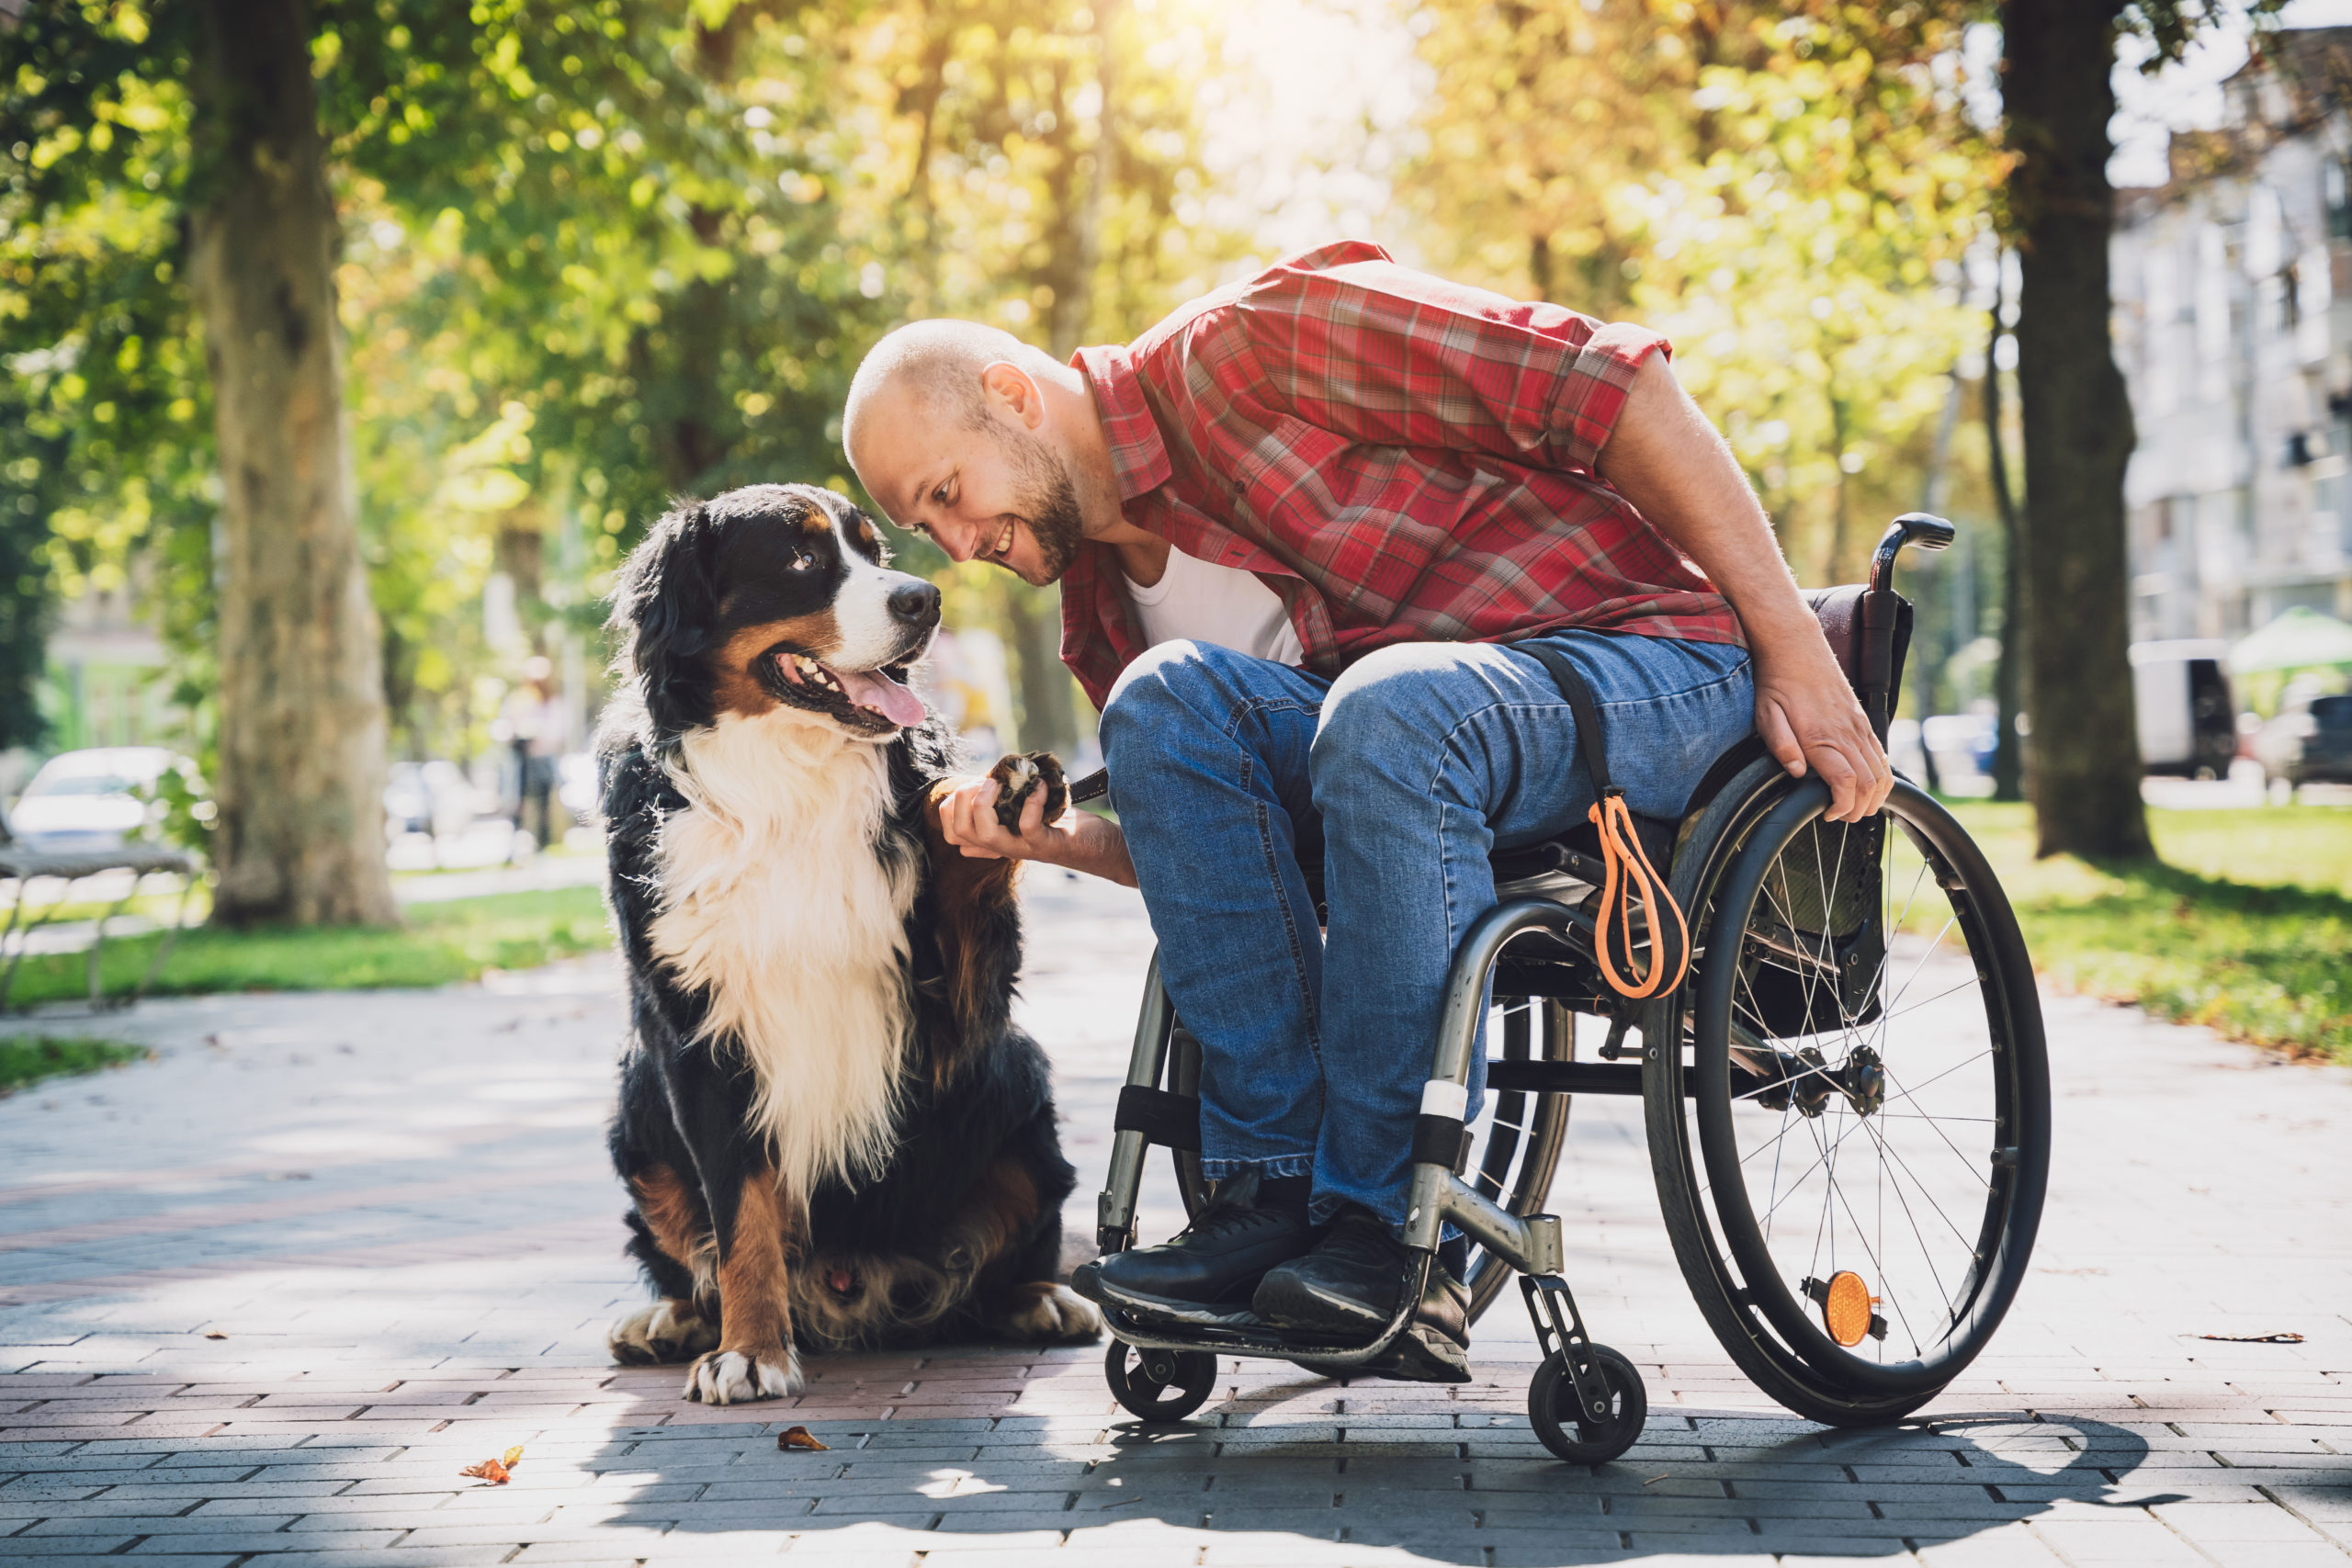 Man in wheel chair with dog